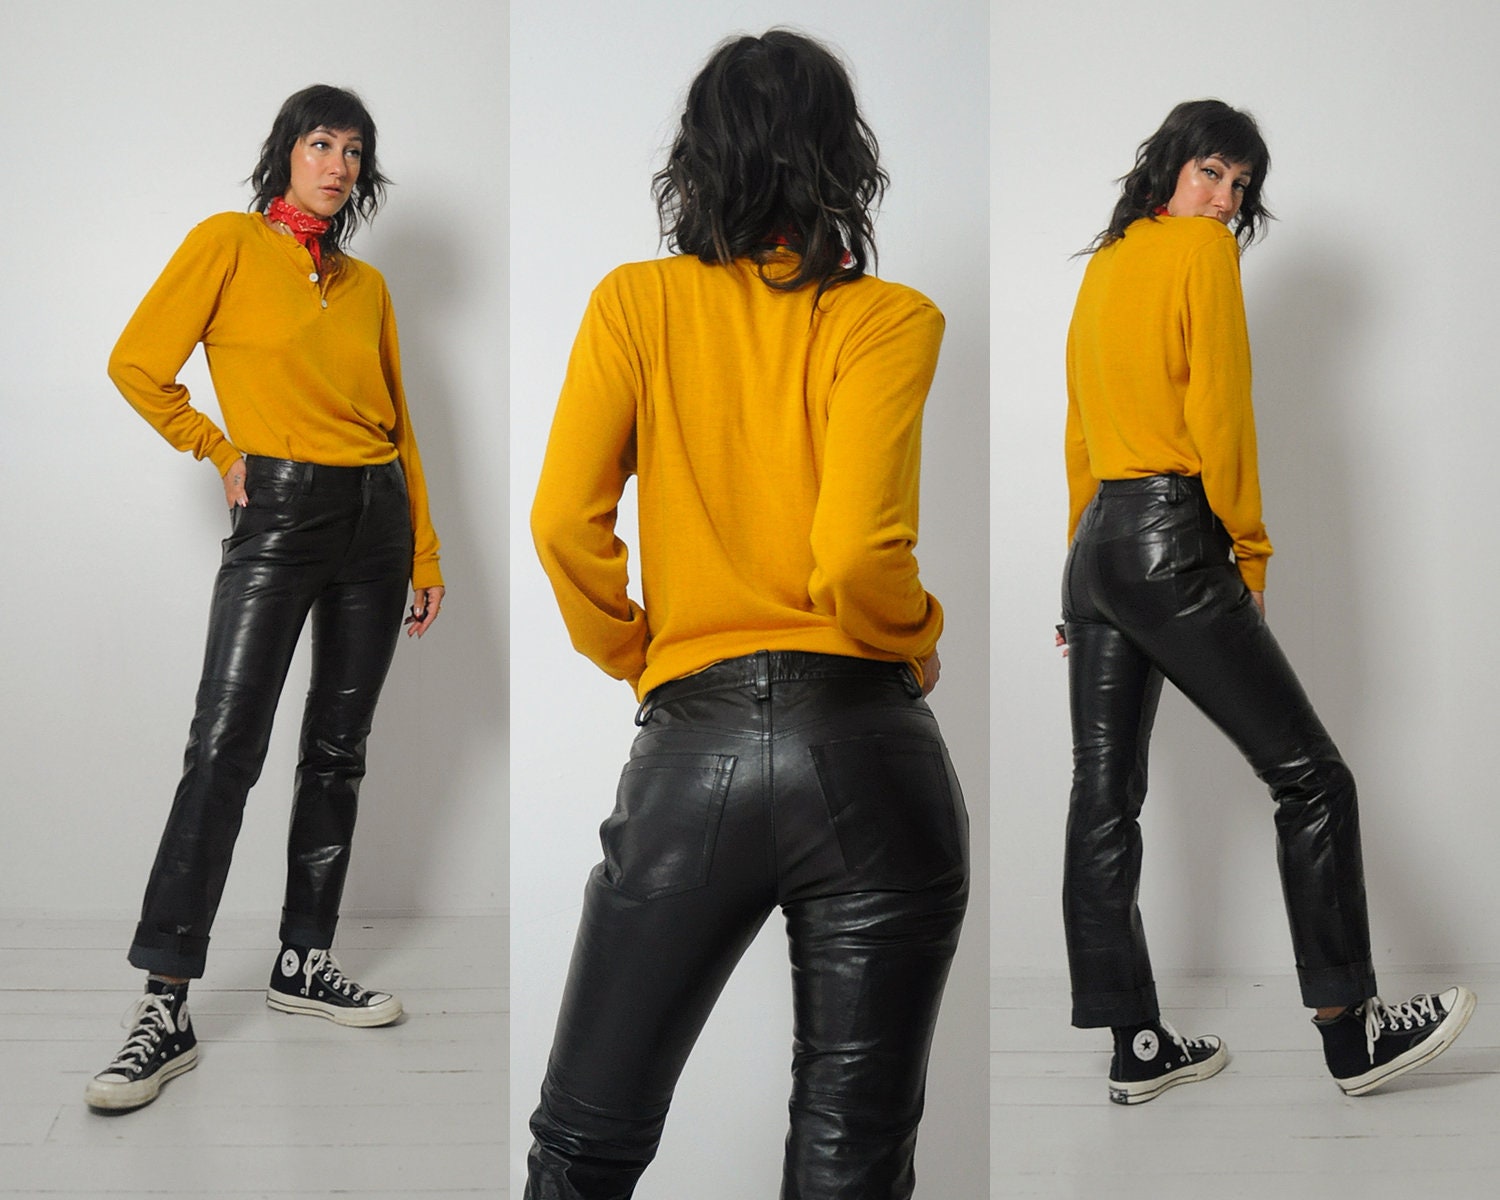 90's Gap Black Leather Jeans -  India